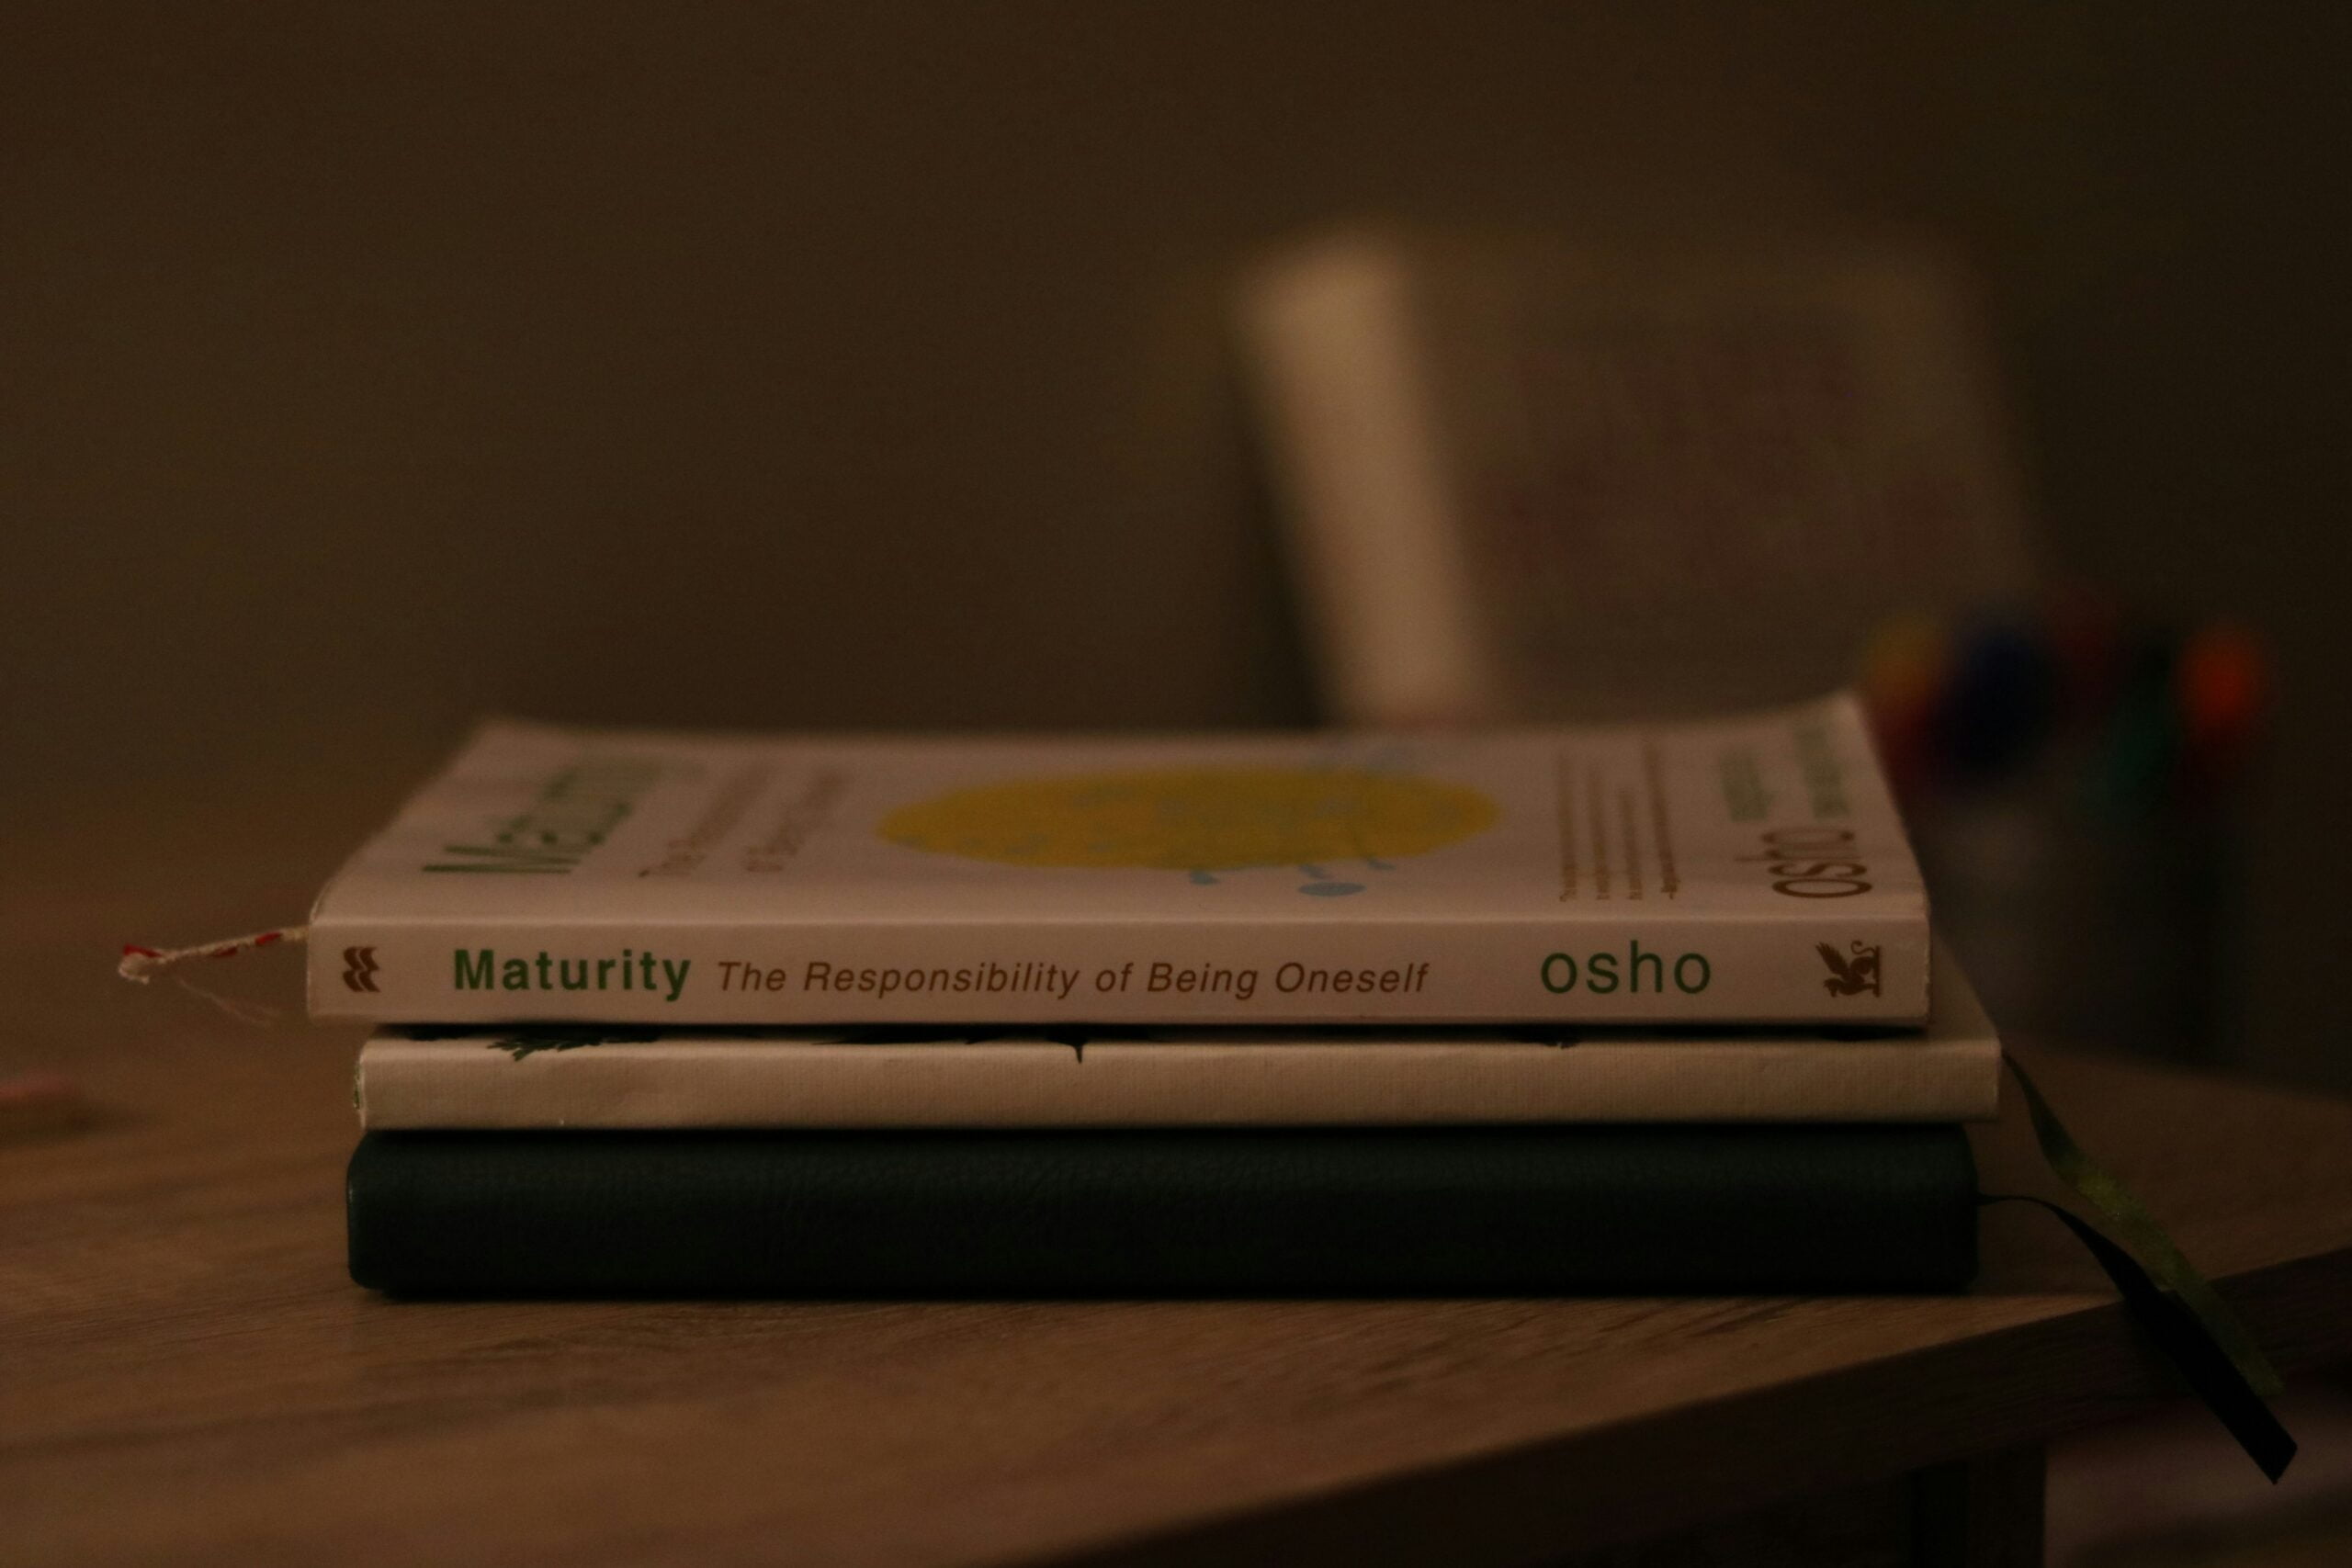 Osho's philosophy, a stack of books sitting on top of a wooden table